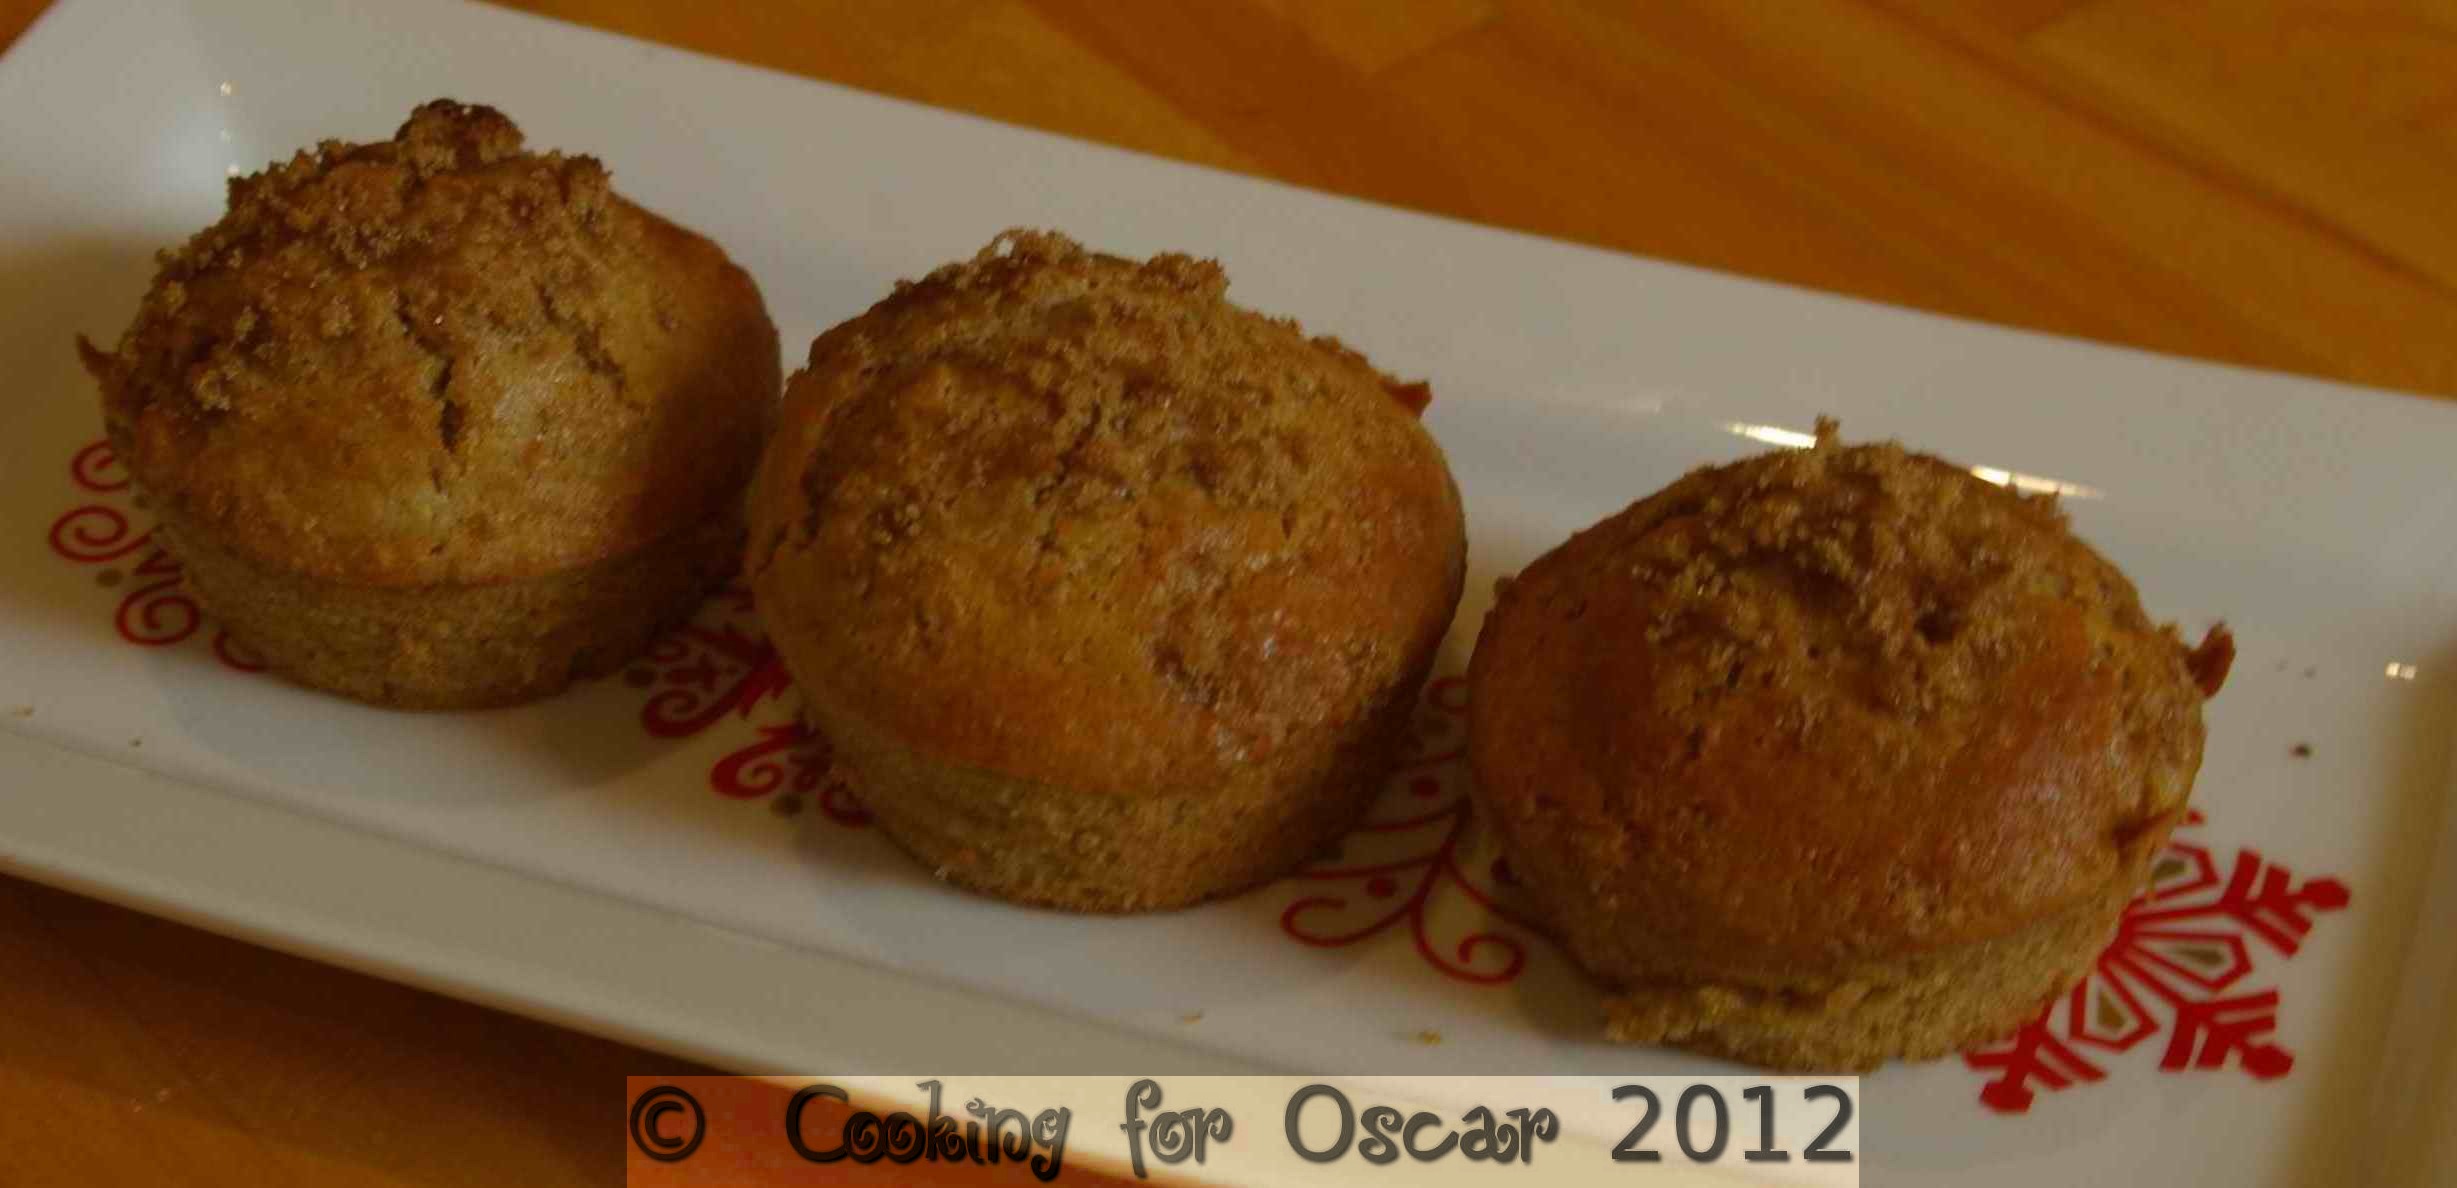 Buckwheat Muffins -03 – Cooking for Oscar